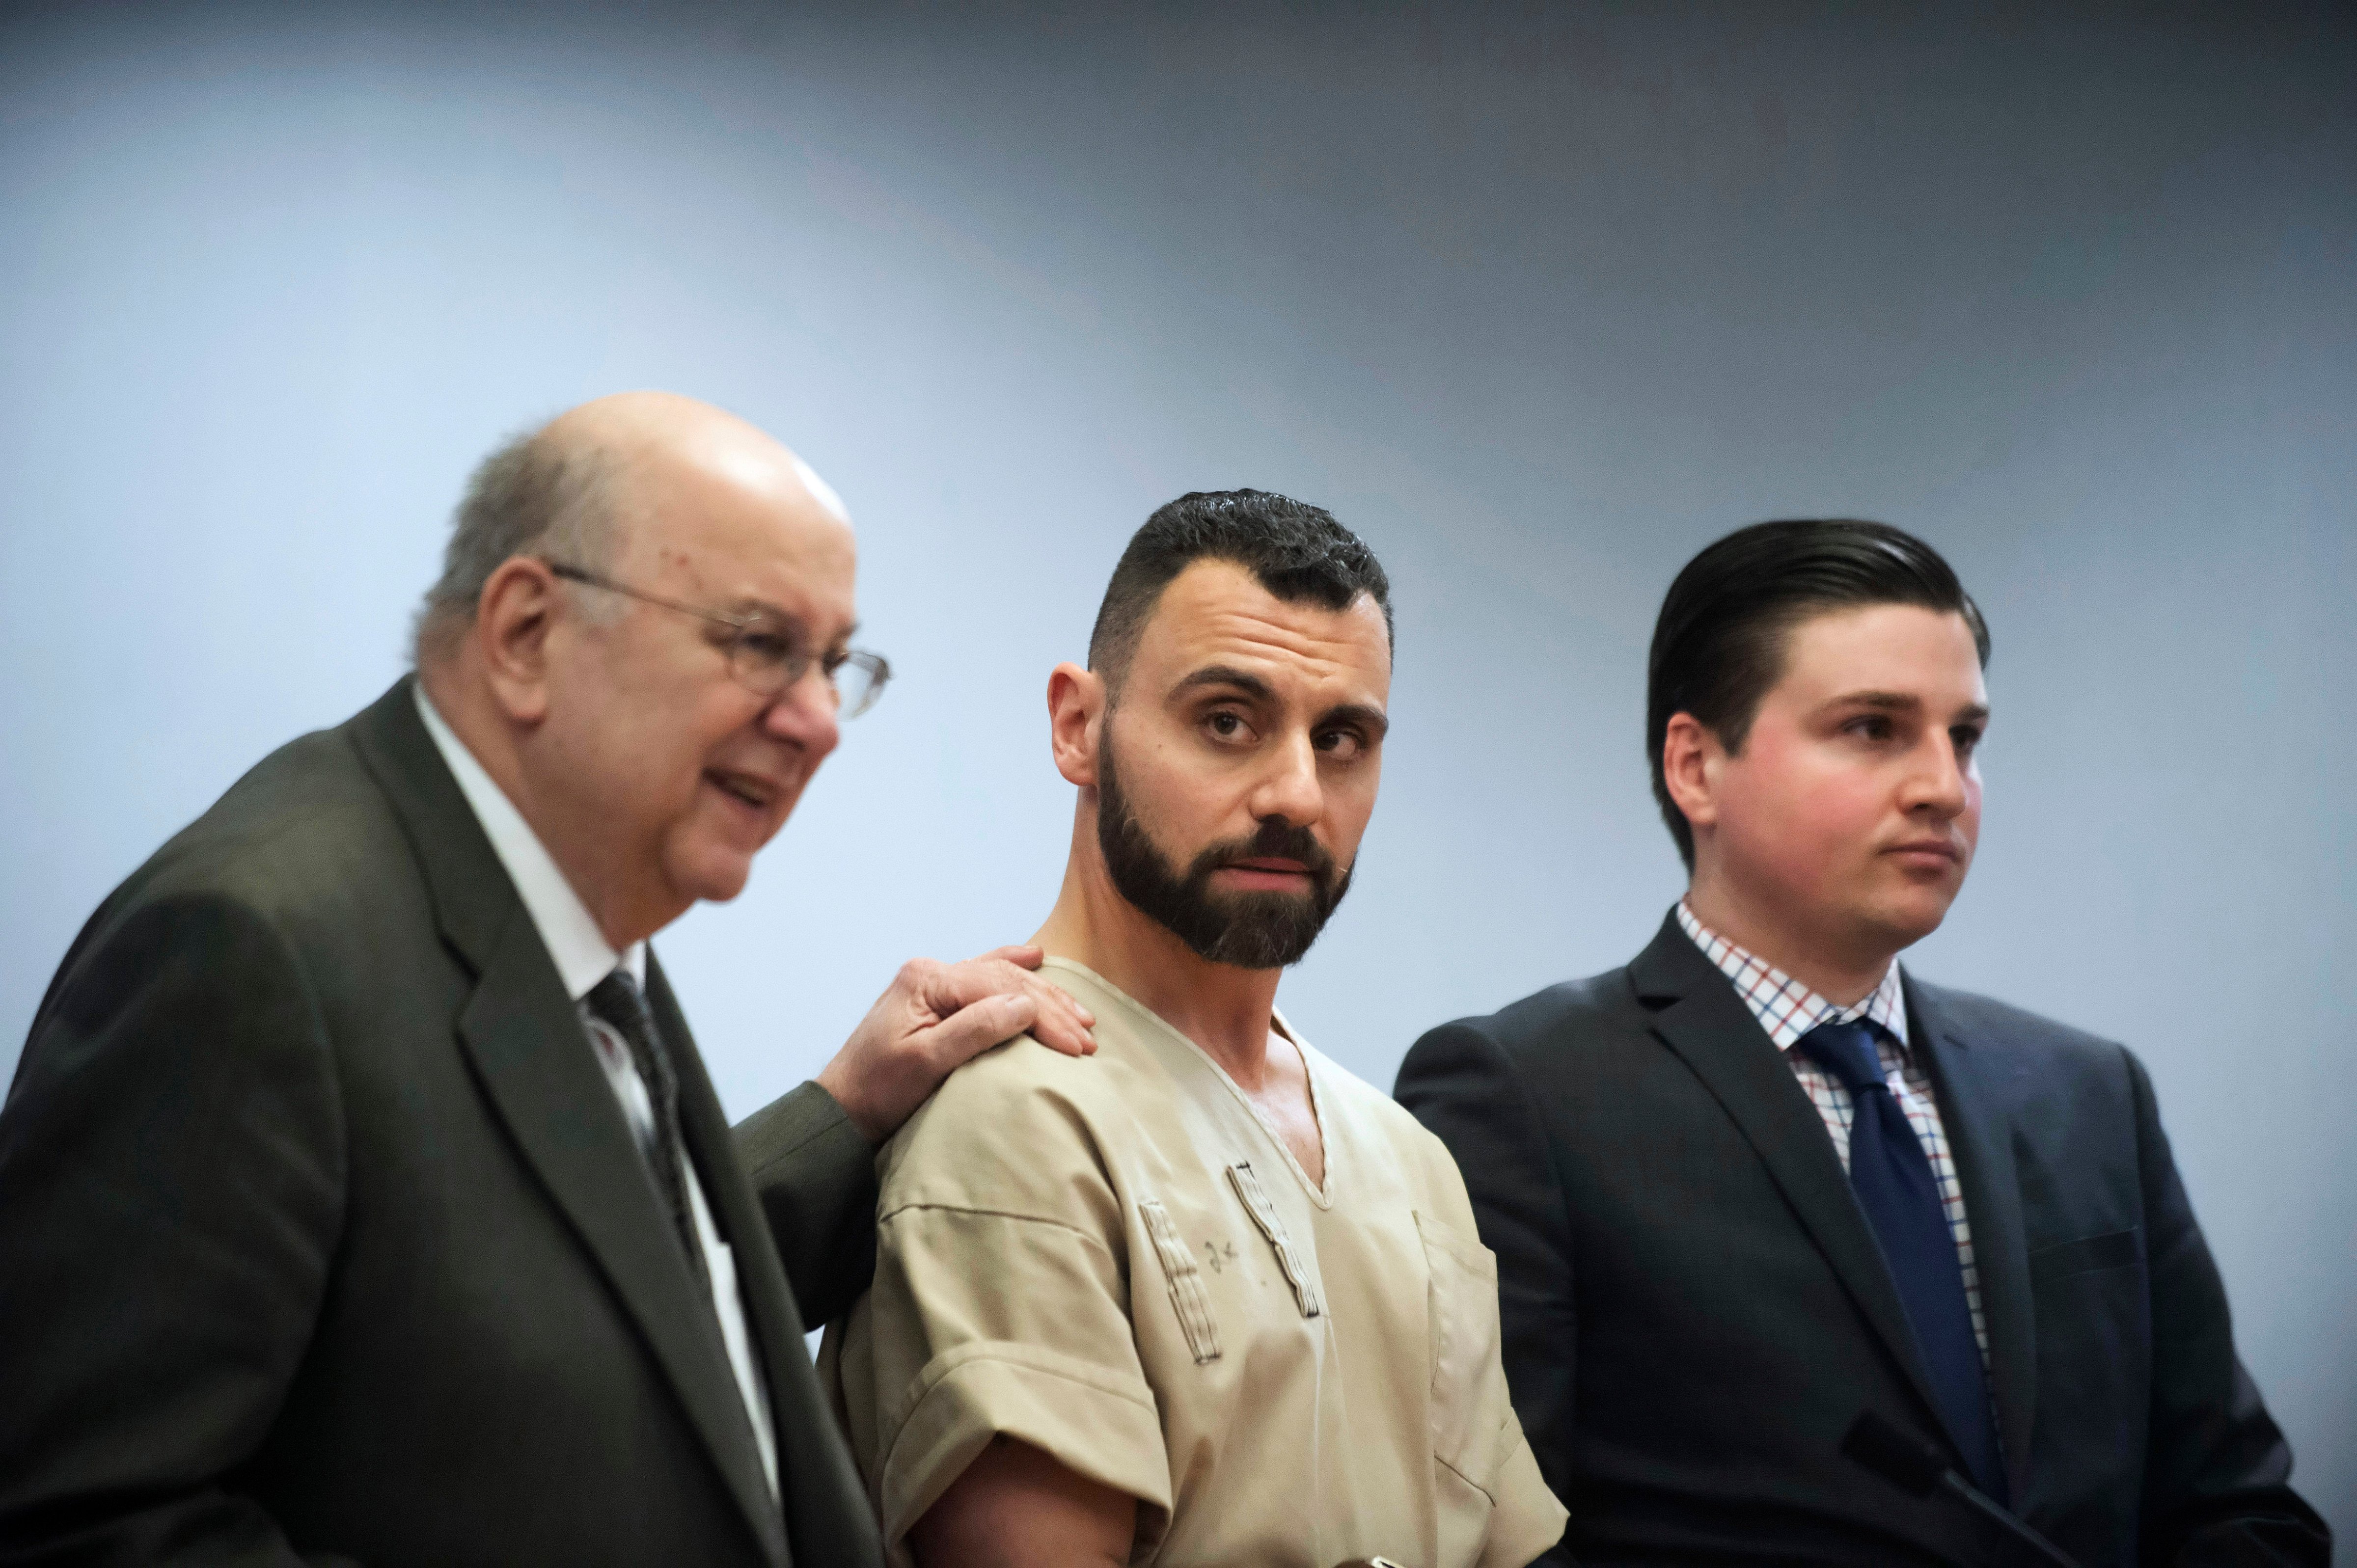 Richard Dabate, center while being arraigned, in Rockville Superior Court in Vernon, Conn on Monday, April 17, 2017.